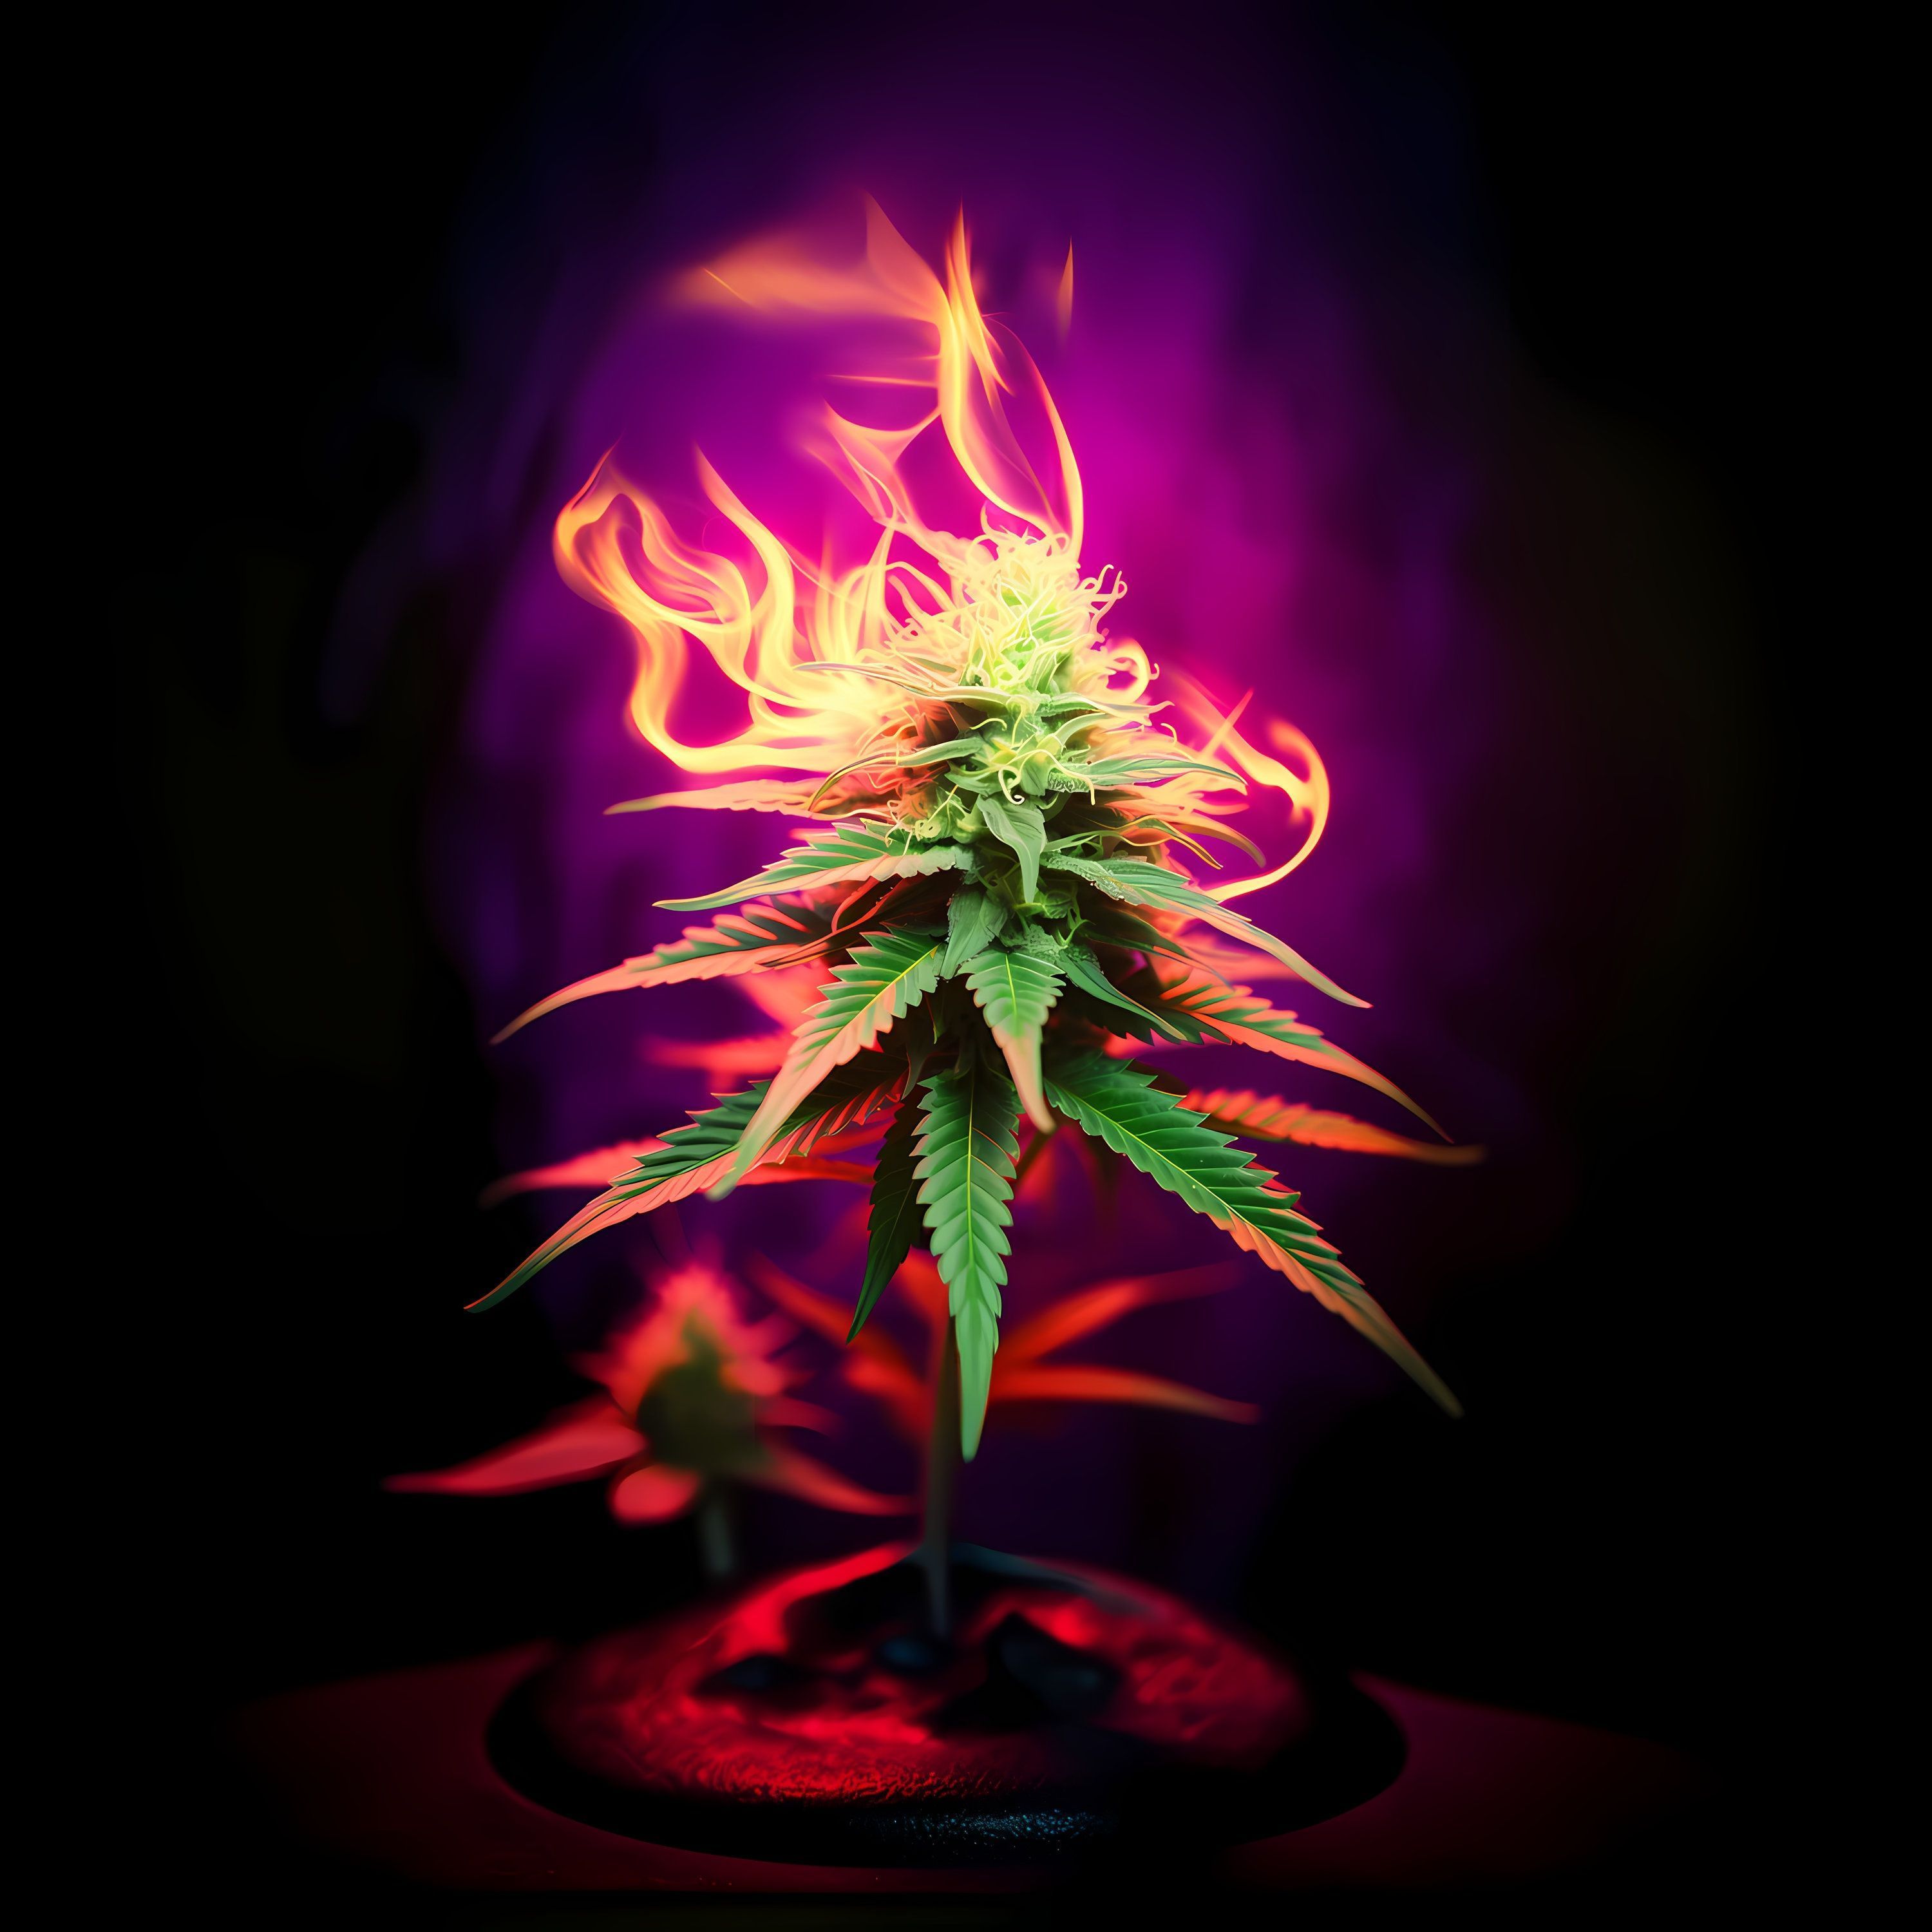 A cannabis plant with red and blue lights - Weed